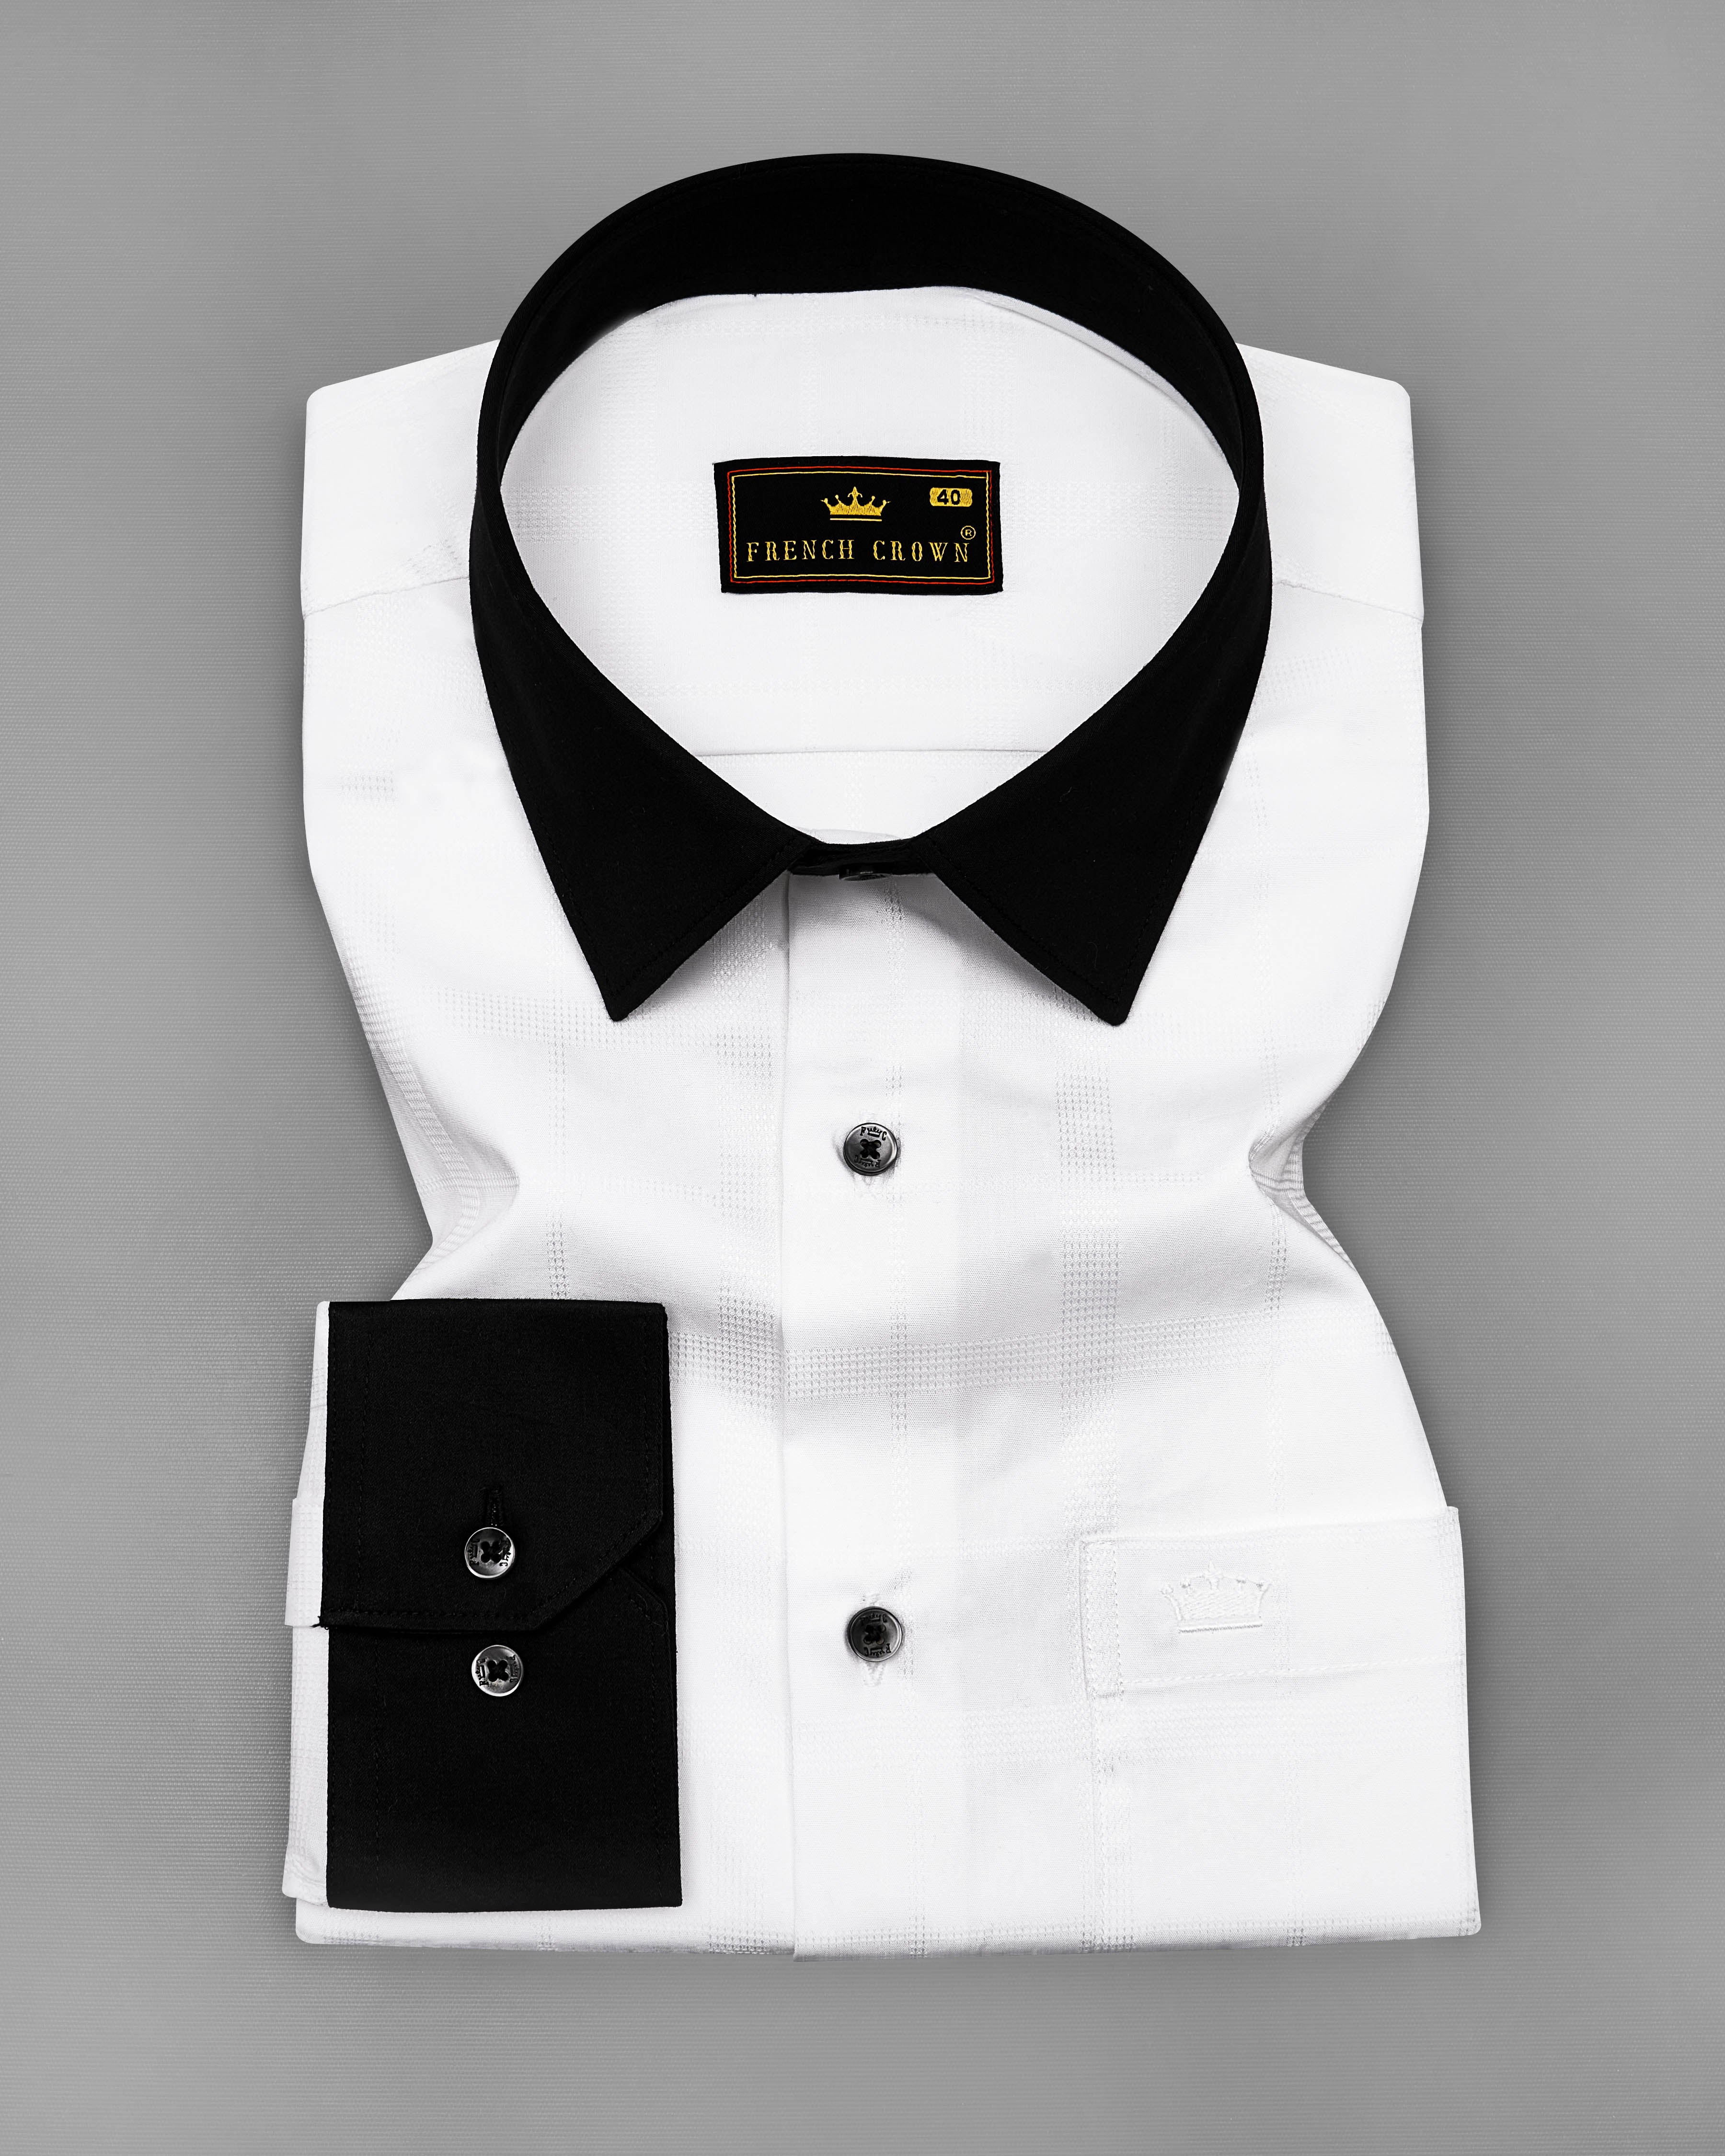 Bright White with Black Cuffs and Collar Dobby Textured Premium Giza Cotton Shirt 8977-BCC-BLK-38, 8977-BCC-BLK-H-38, 8977-BCC-BLK-39, 8977-BCC-BLK-H-39, 8977-BCC-BLK-40, 8977-BCC-BLK-H-40, 8977-BCC-BLK-42, 8977-BCC-BLK-H-42, 8977-BCC-BLK-44, 8977-BCC-BLK-H-44, 8977-BCC-BLK-46, 8977-BCC-BLK-H-46, 8977-BCC-BLK-48, 8977-BCC-BLK-H-48, 8977-BCC-BLK-50, 8977-BCC-BLK-H-50, 8977-BCC-BLK-52, 8977-BCC-BLK-H-52